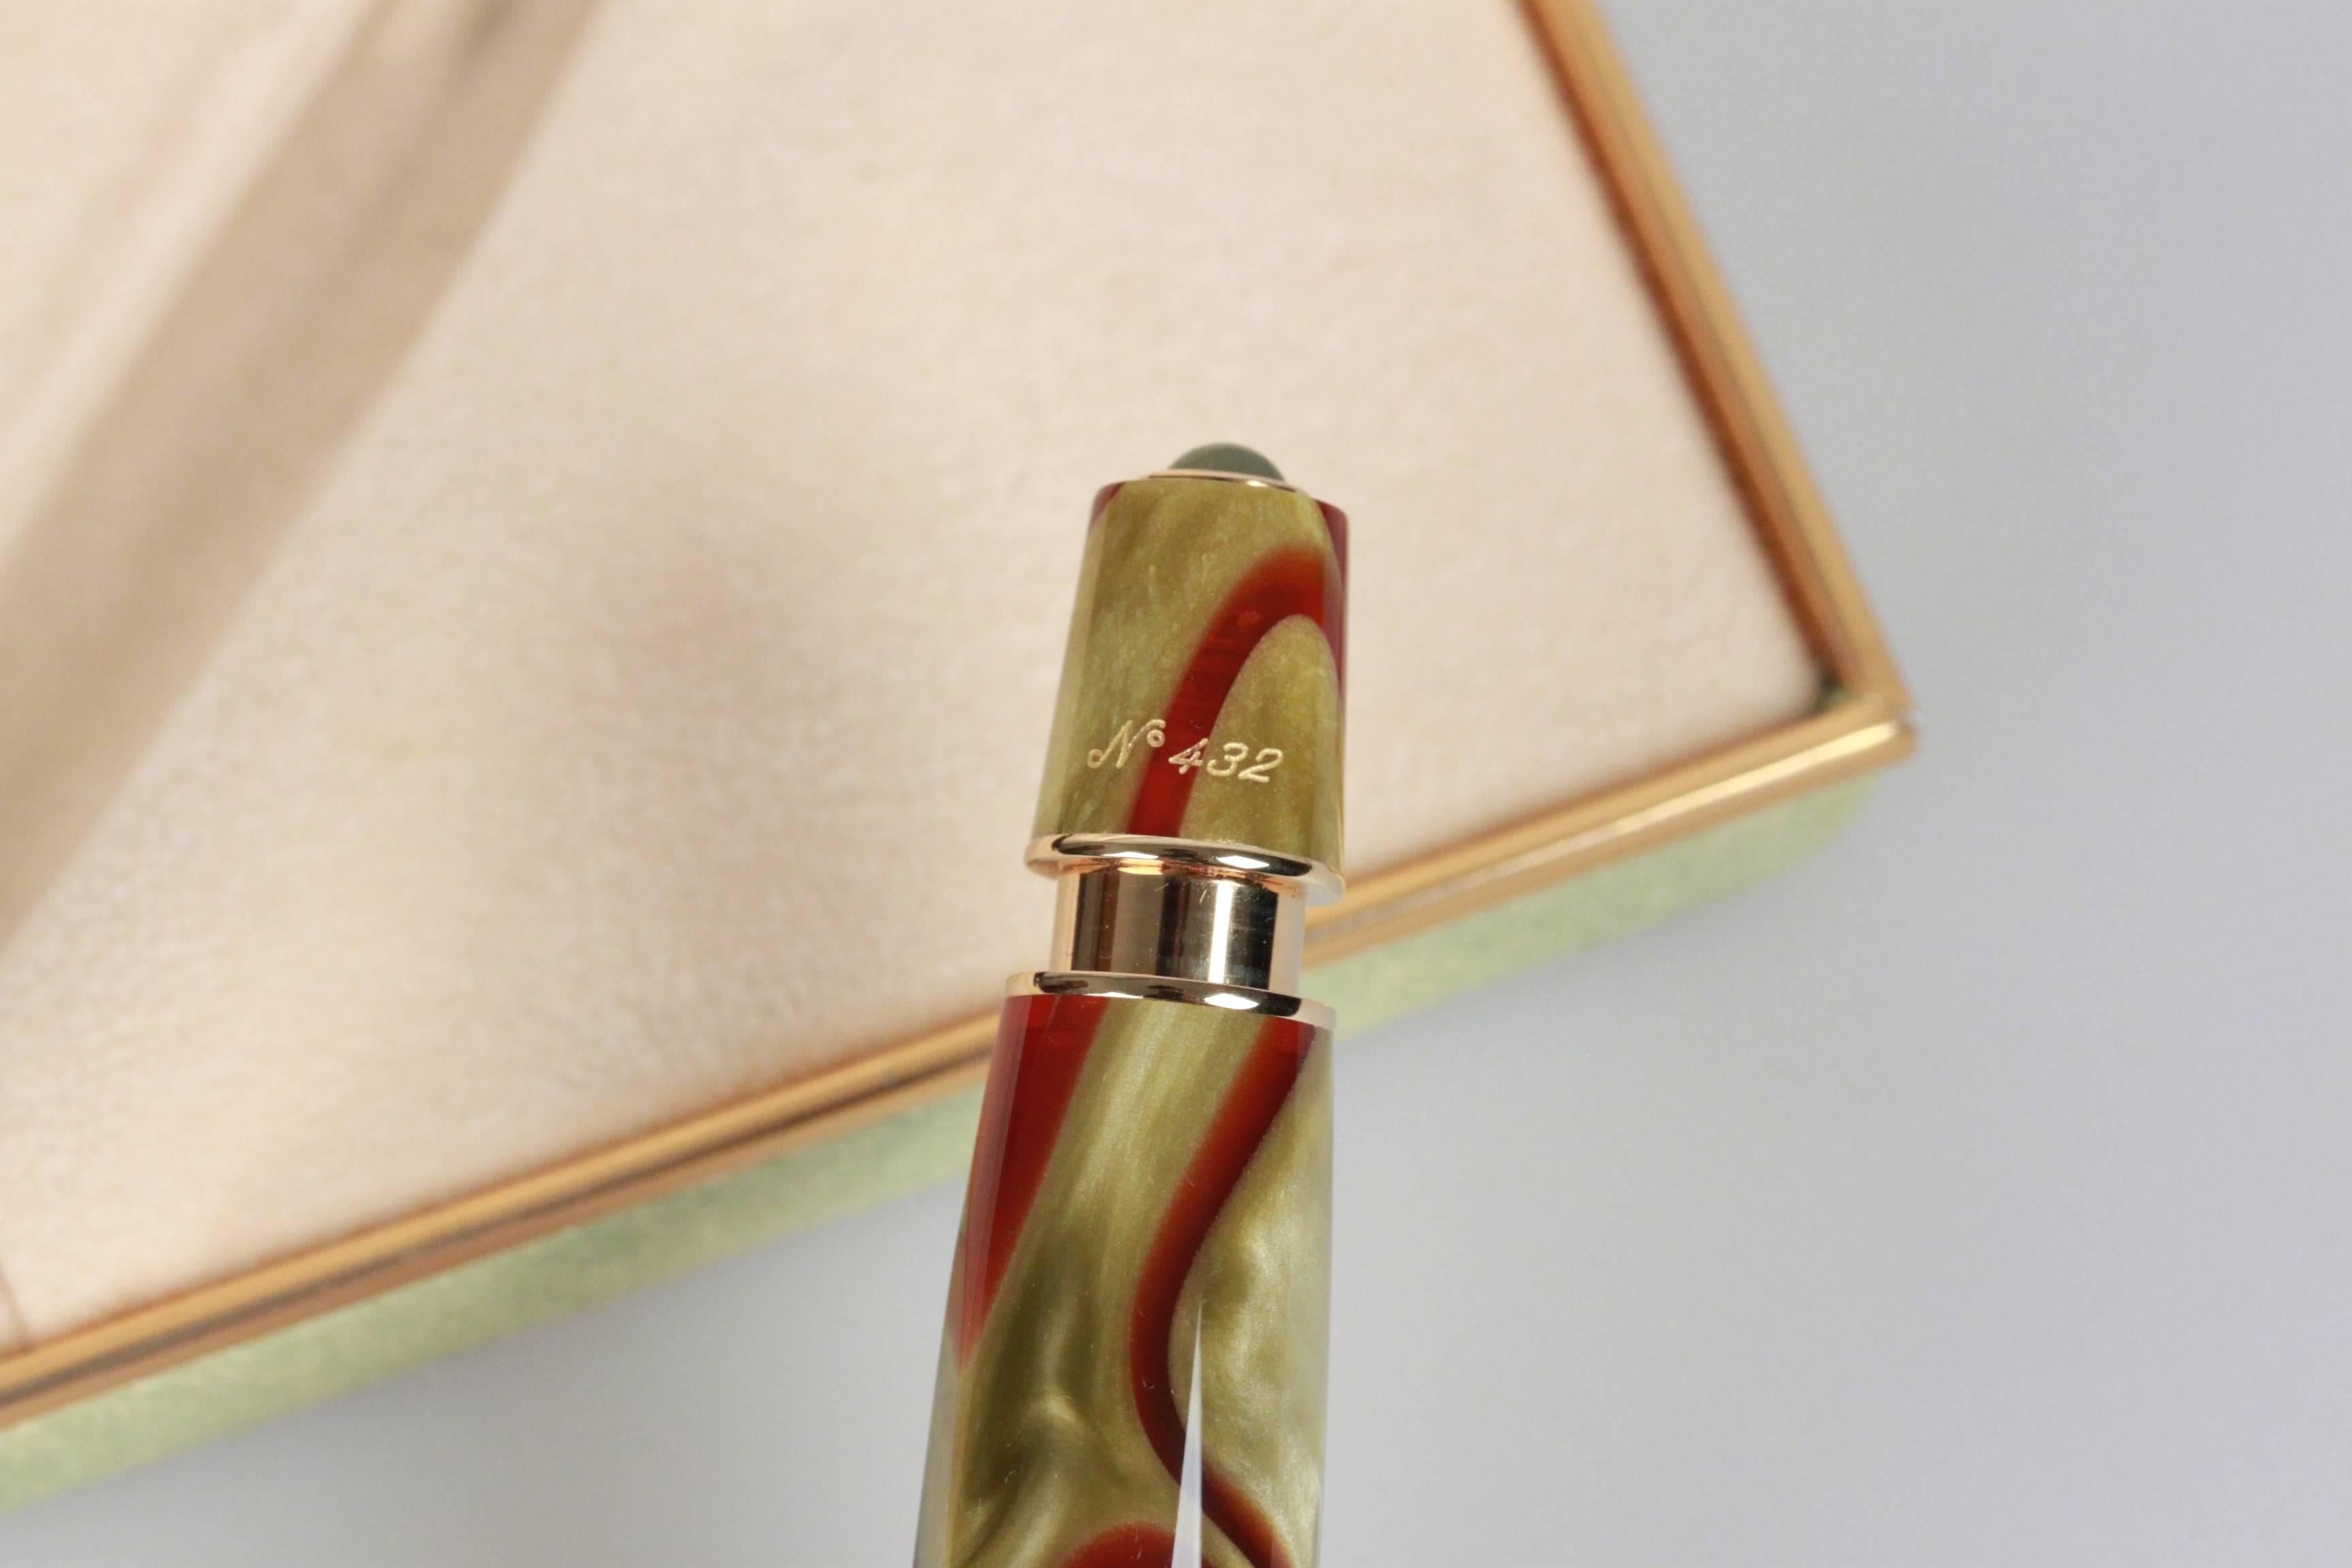 - Limited edition 'ASIA' Sketch Pen inspired by the Asian continent by AURORA
- Reference: 537
- Material: Marbled Resin
- Color: Green
- Gold metal trim
- Lead: 5,5 mm
- Twist closing system
- Made in Italy
- Leather AURORA holder inluded
- Comes